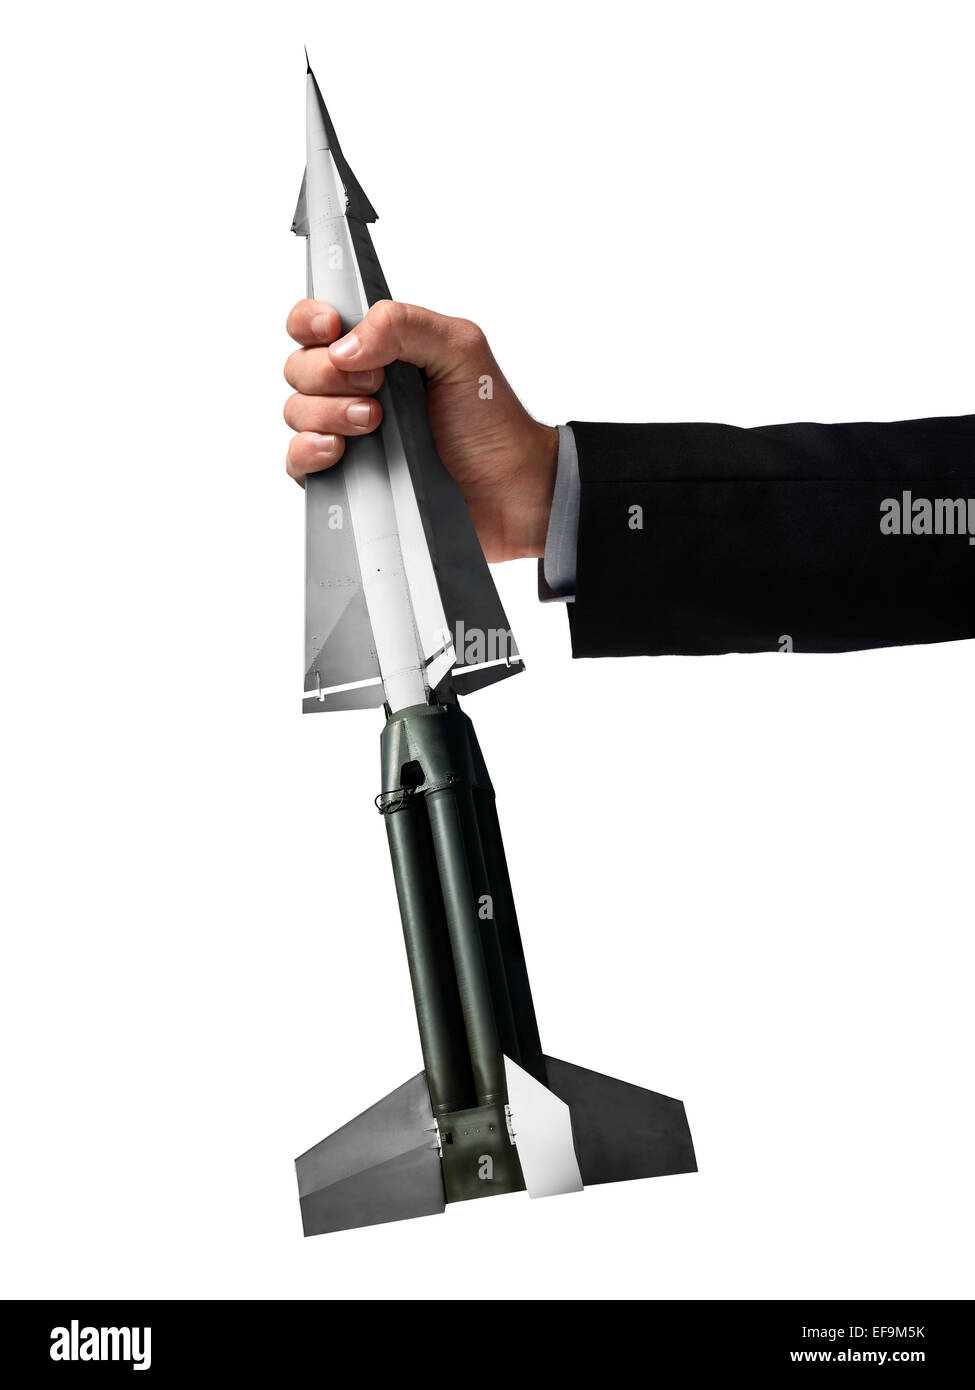 Nuclear missile being grasped by a giant hand against white background Stock Photo